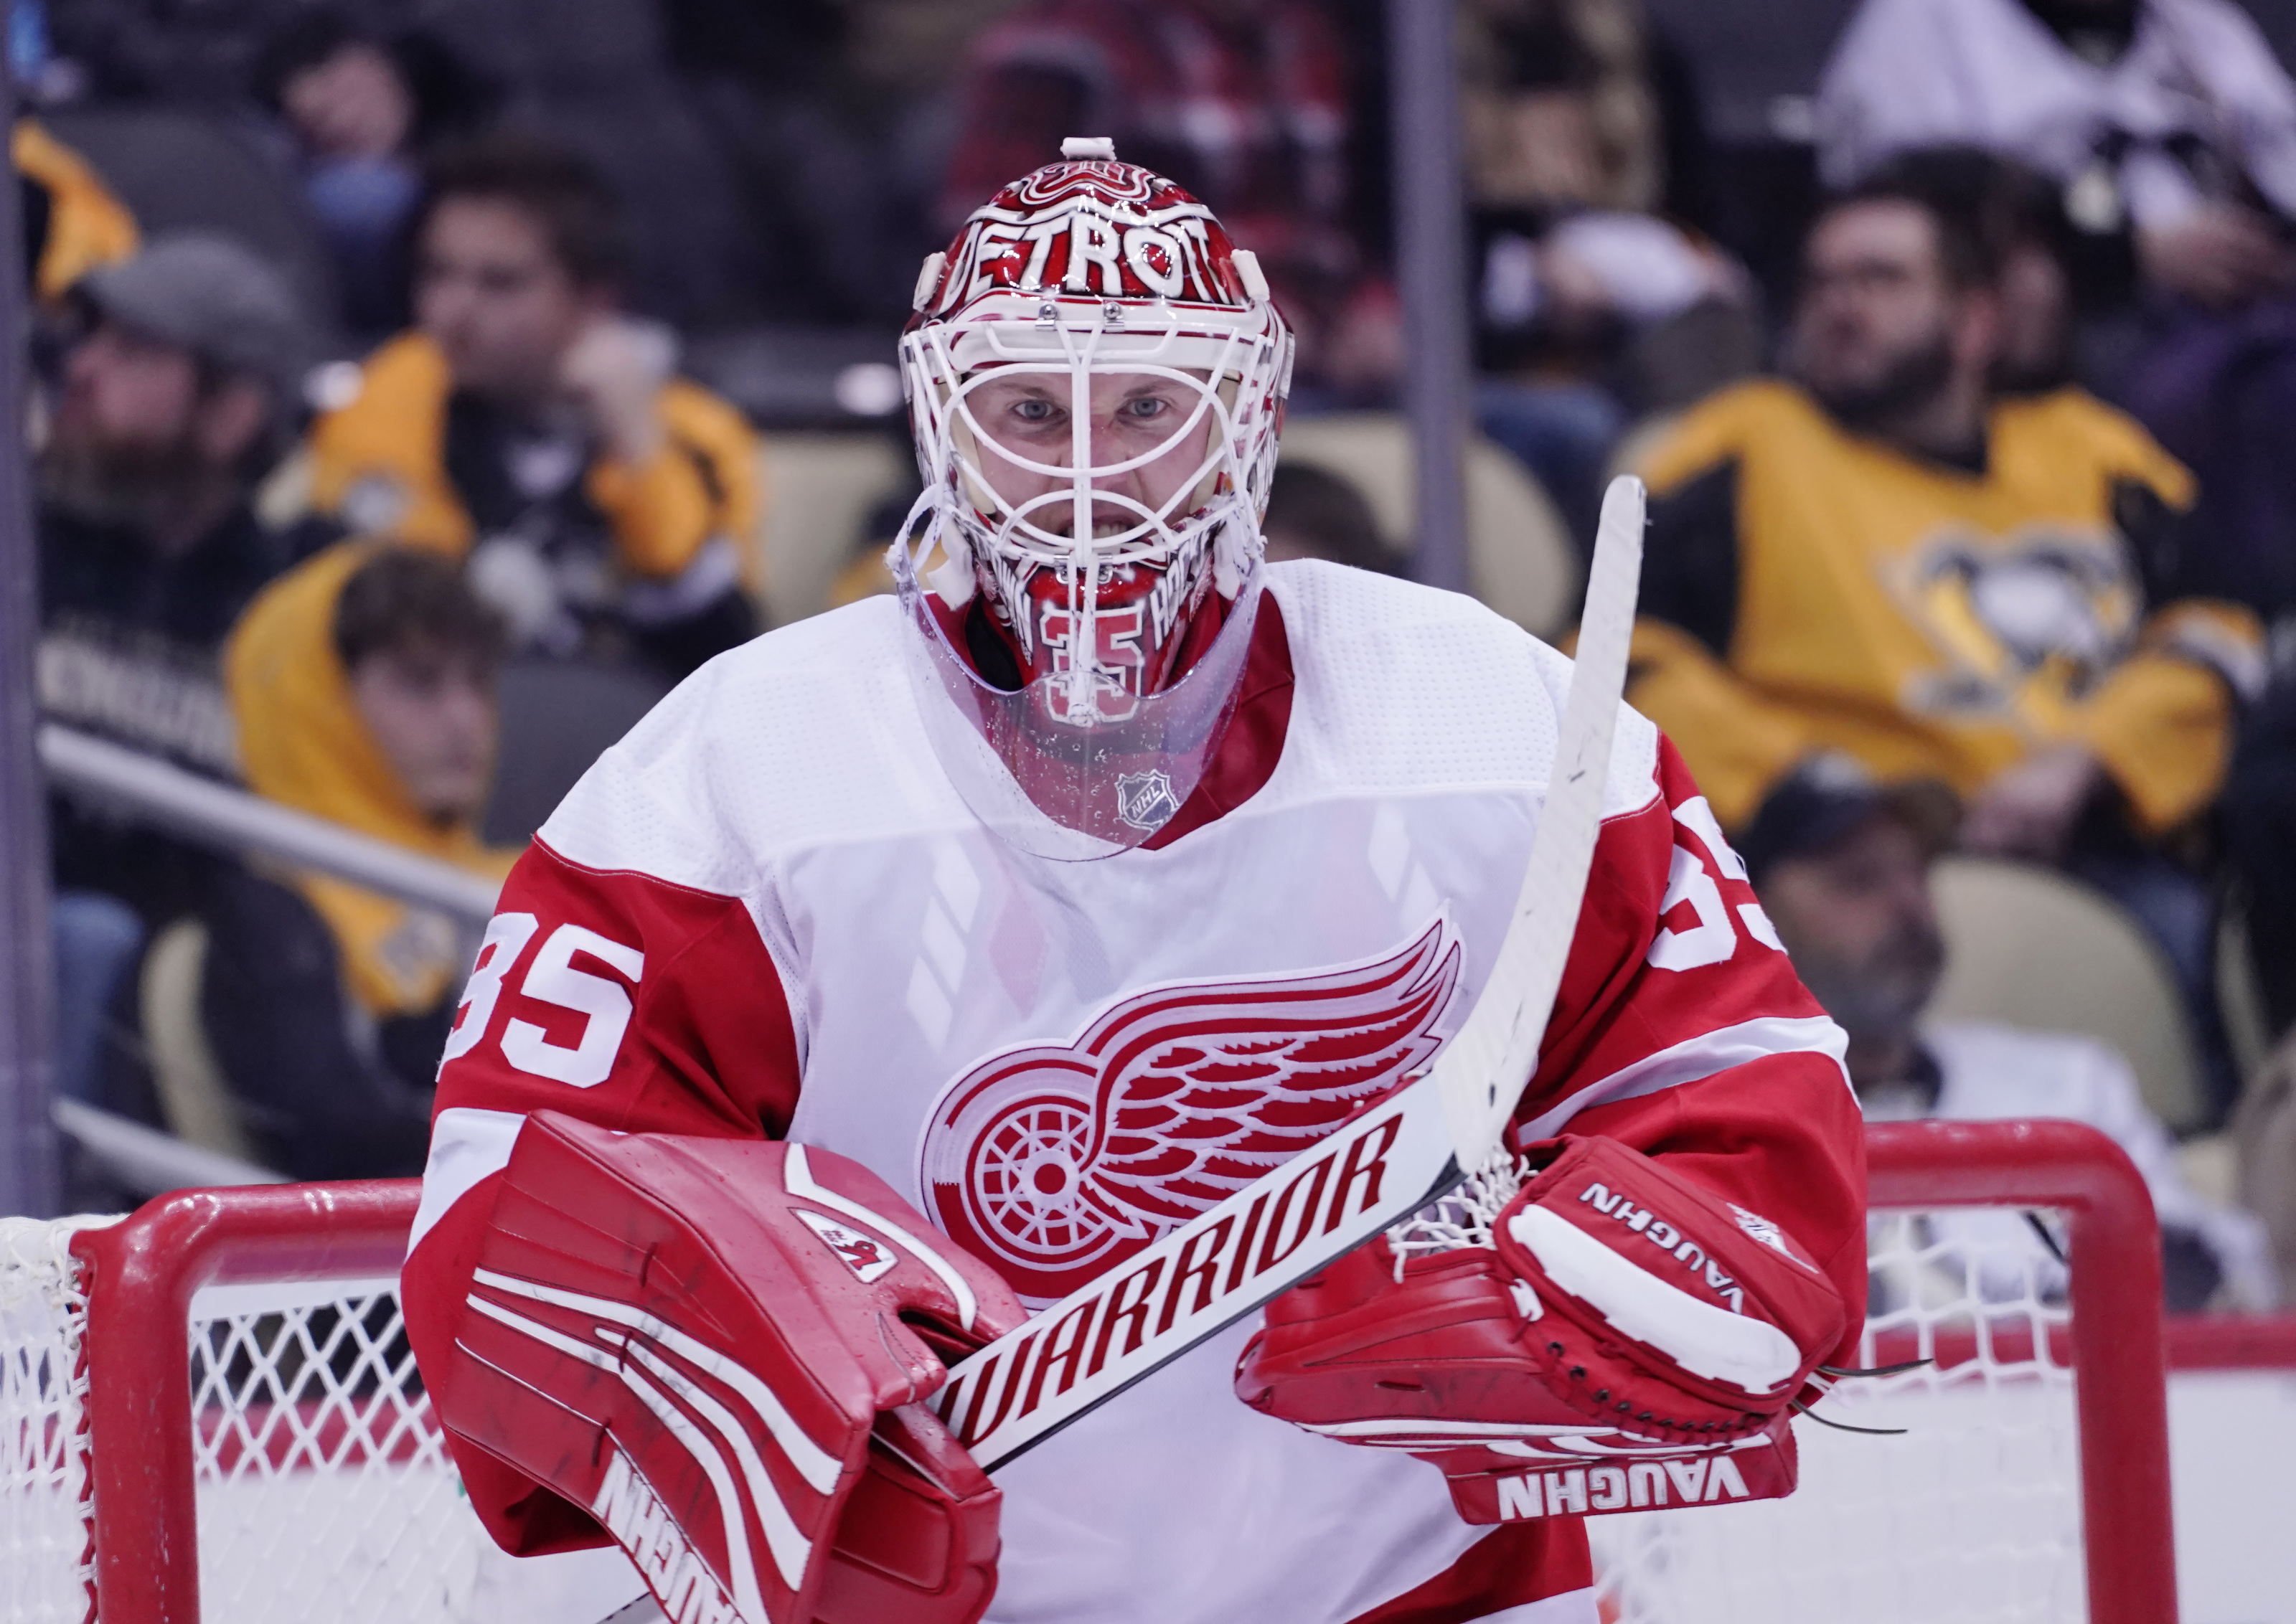 Detroit Red Wings goalie Jimmy Howard (35) during the NHL game